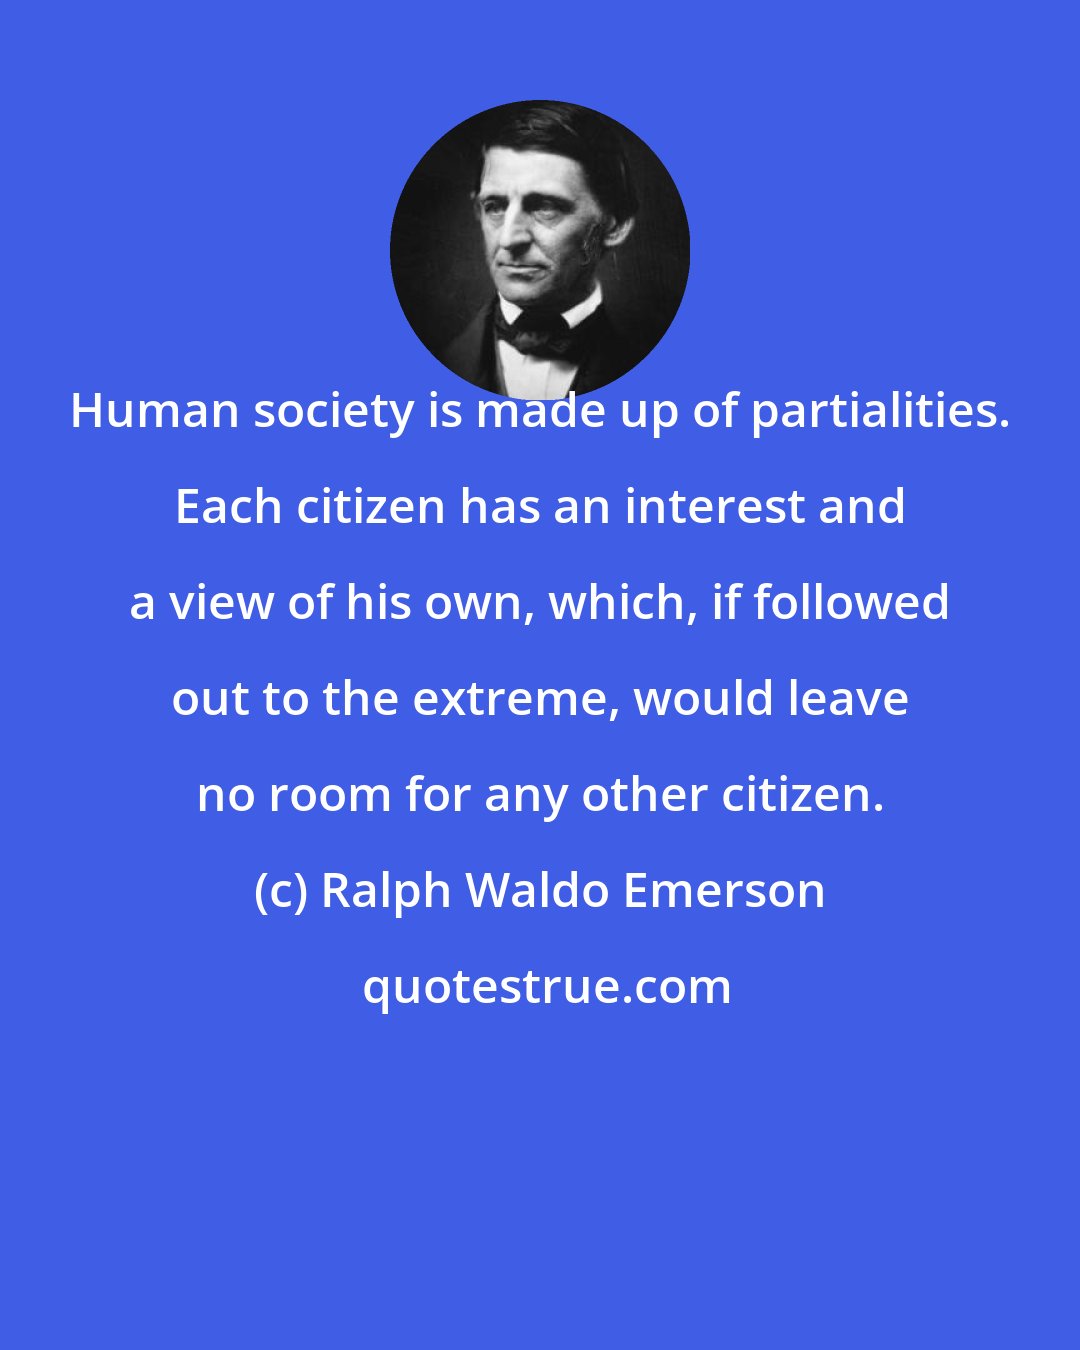 Ralph Waldo Emerson: Human society is made up of partialities. Each citizen has an interest and a view of his own, which, if followed out to the extreme, would leave no room for any other citizen.